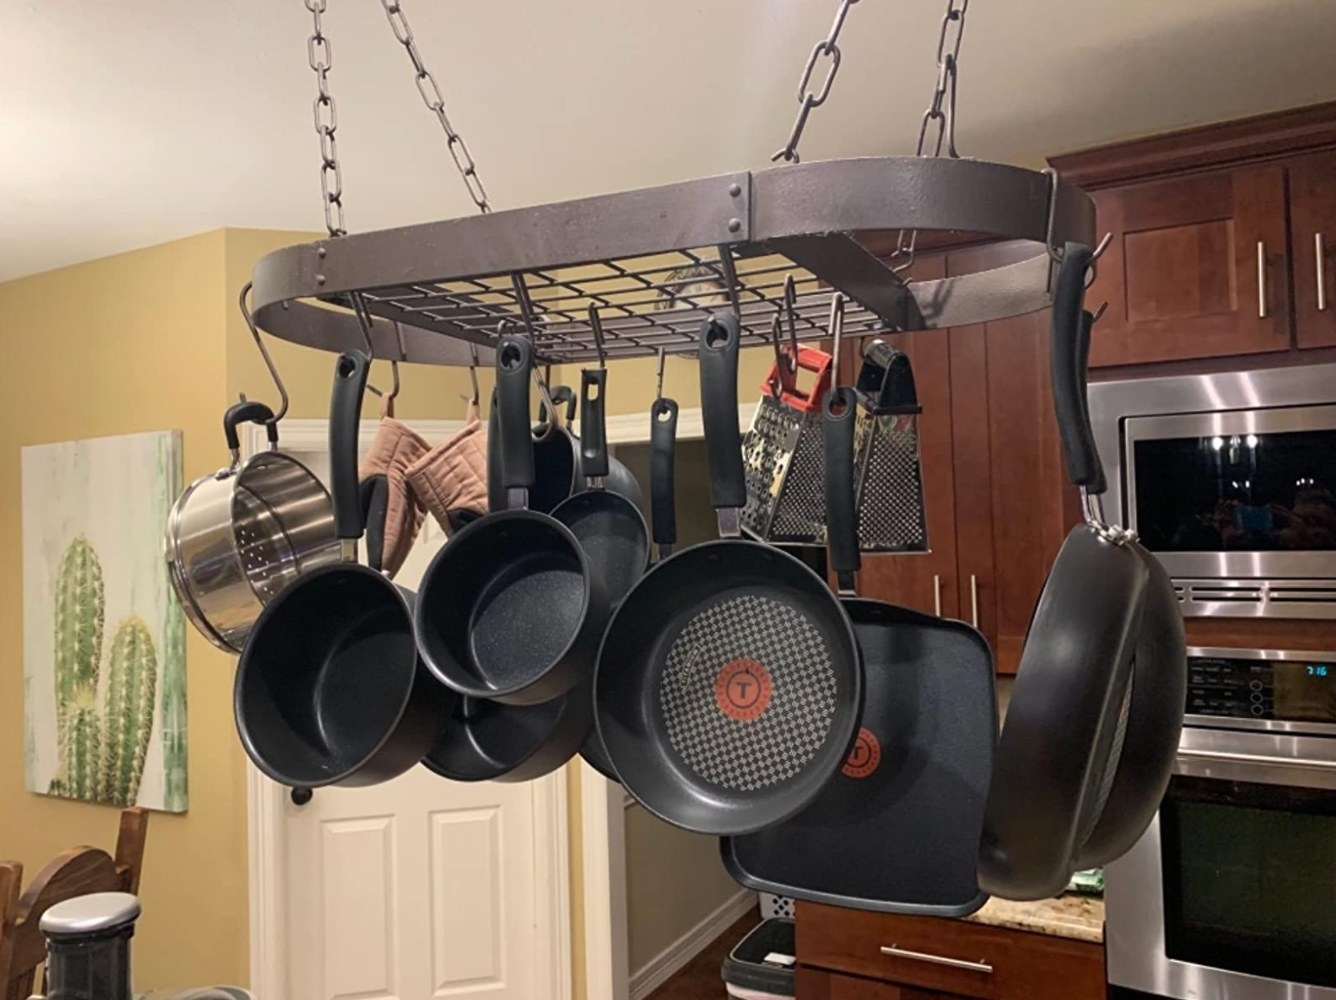 The reviewer&#x27;s photo of the 17 piece nonstick cookware set hanging in a kitchen